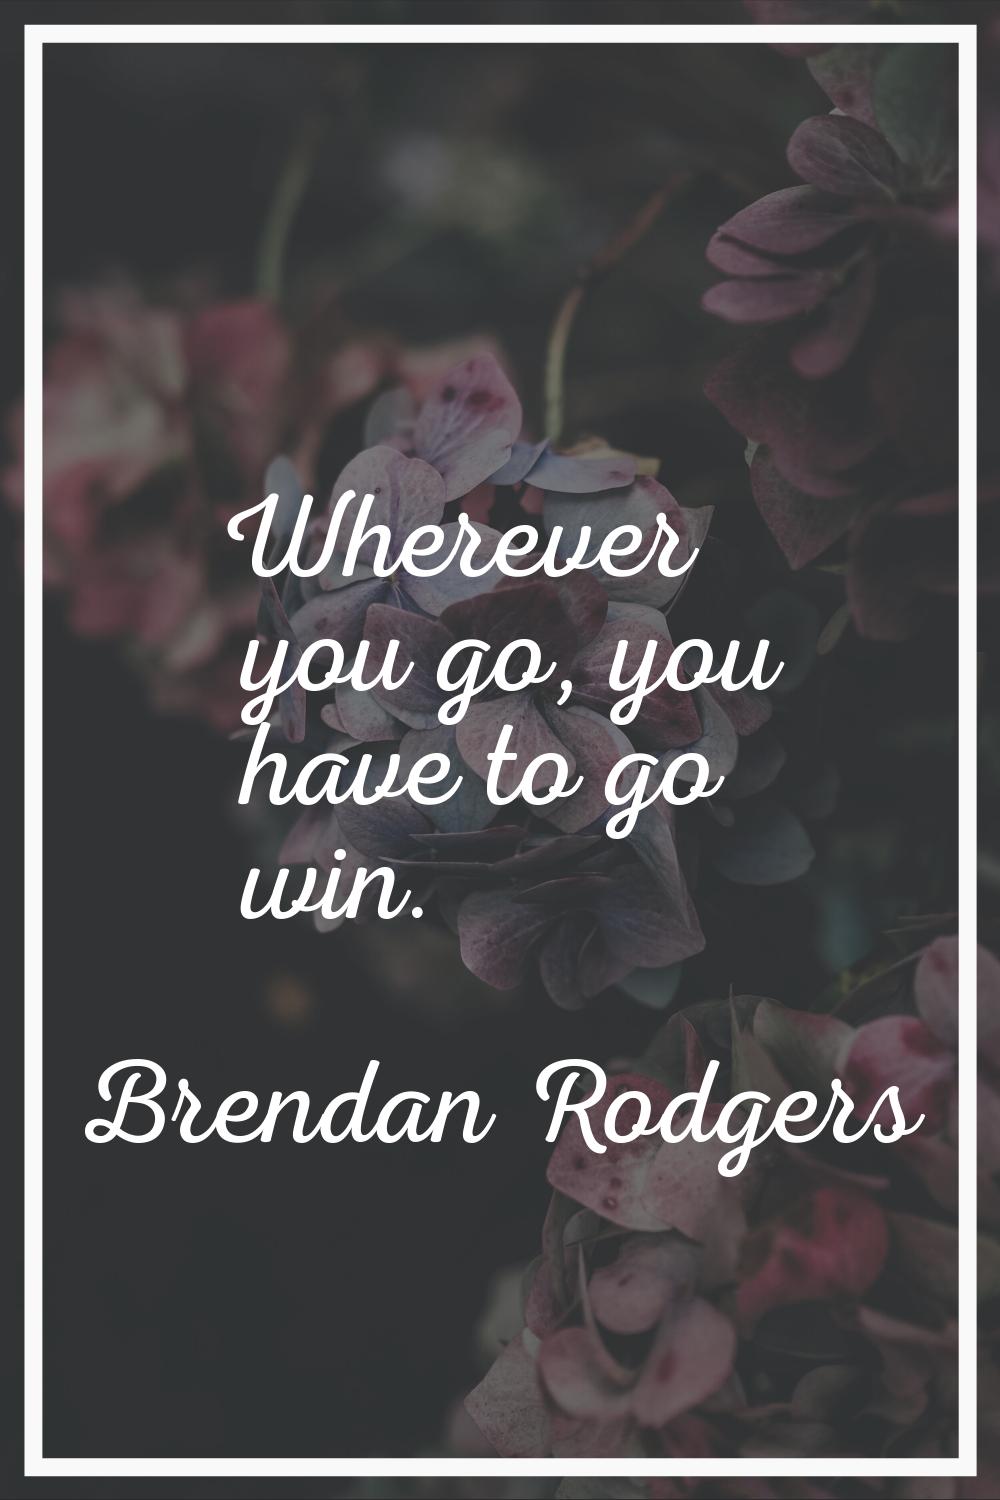 Wherever you go, you have to go win.